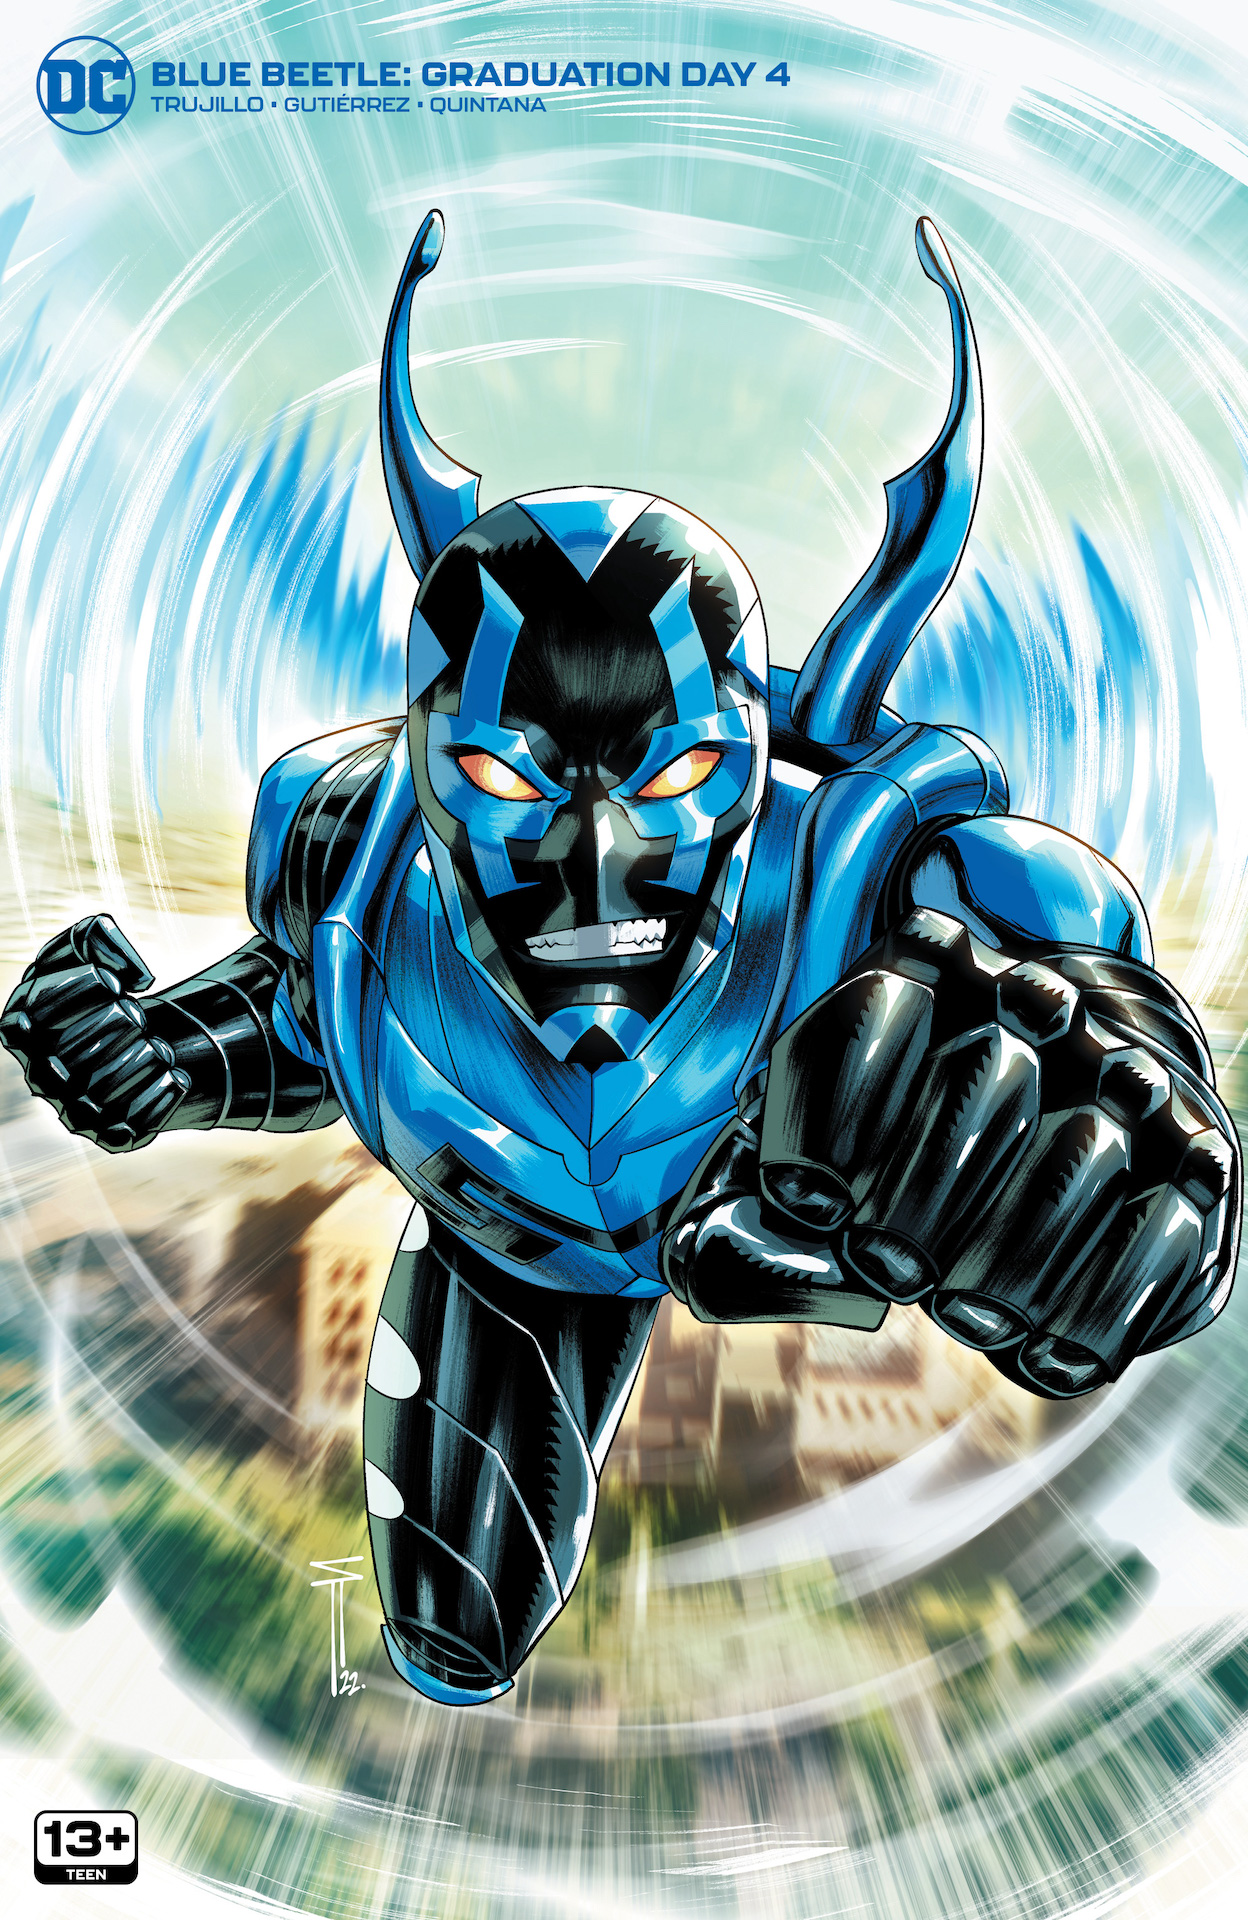 DC Preview: DC Preview: Blue Beetle: Graduation Day #4 (Spanish)